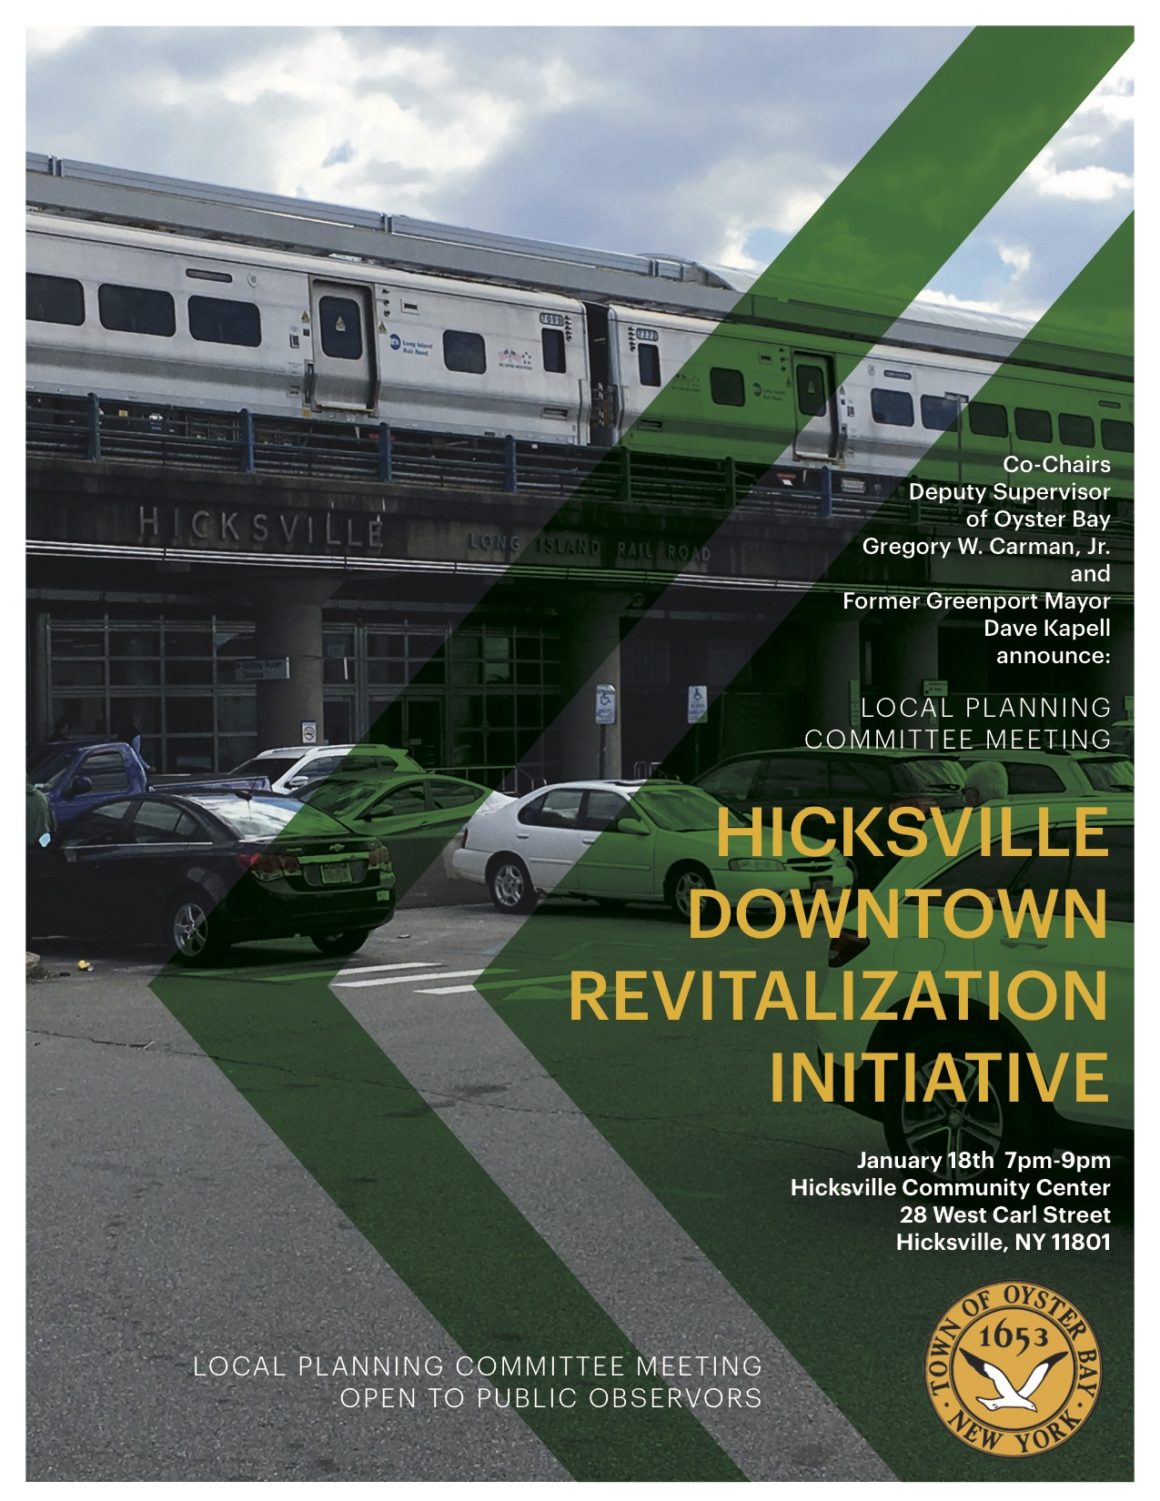 Saladino, Macagnone Announce Fourth Local Planning Meeting for Downtown Hicksville Redevelopment